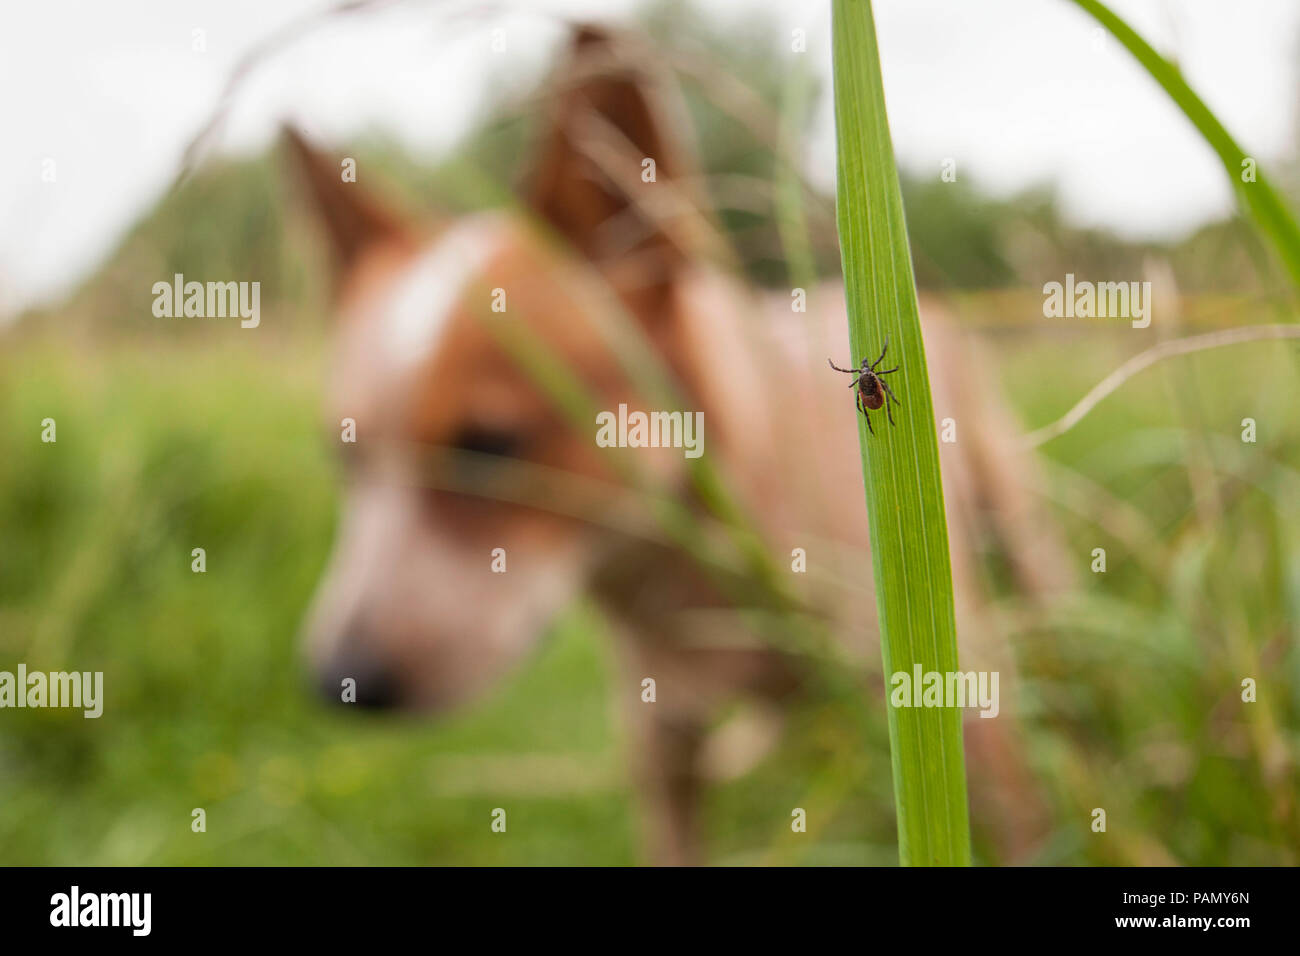 Castor Bean Tick (Ixodes ricinus). Female on a blade of grass with Australian Cattle Dog in background. Germany Stock Photo